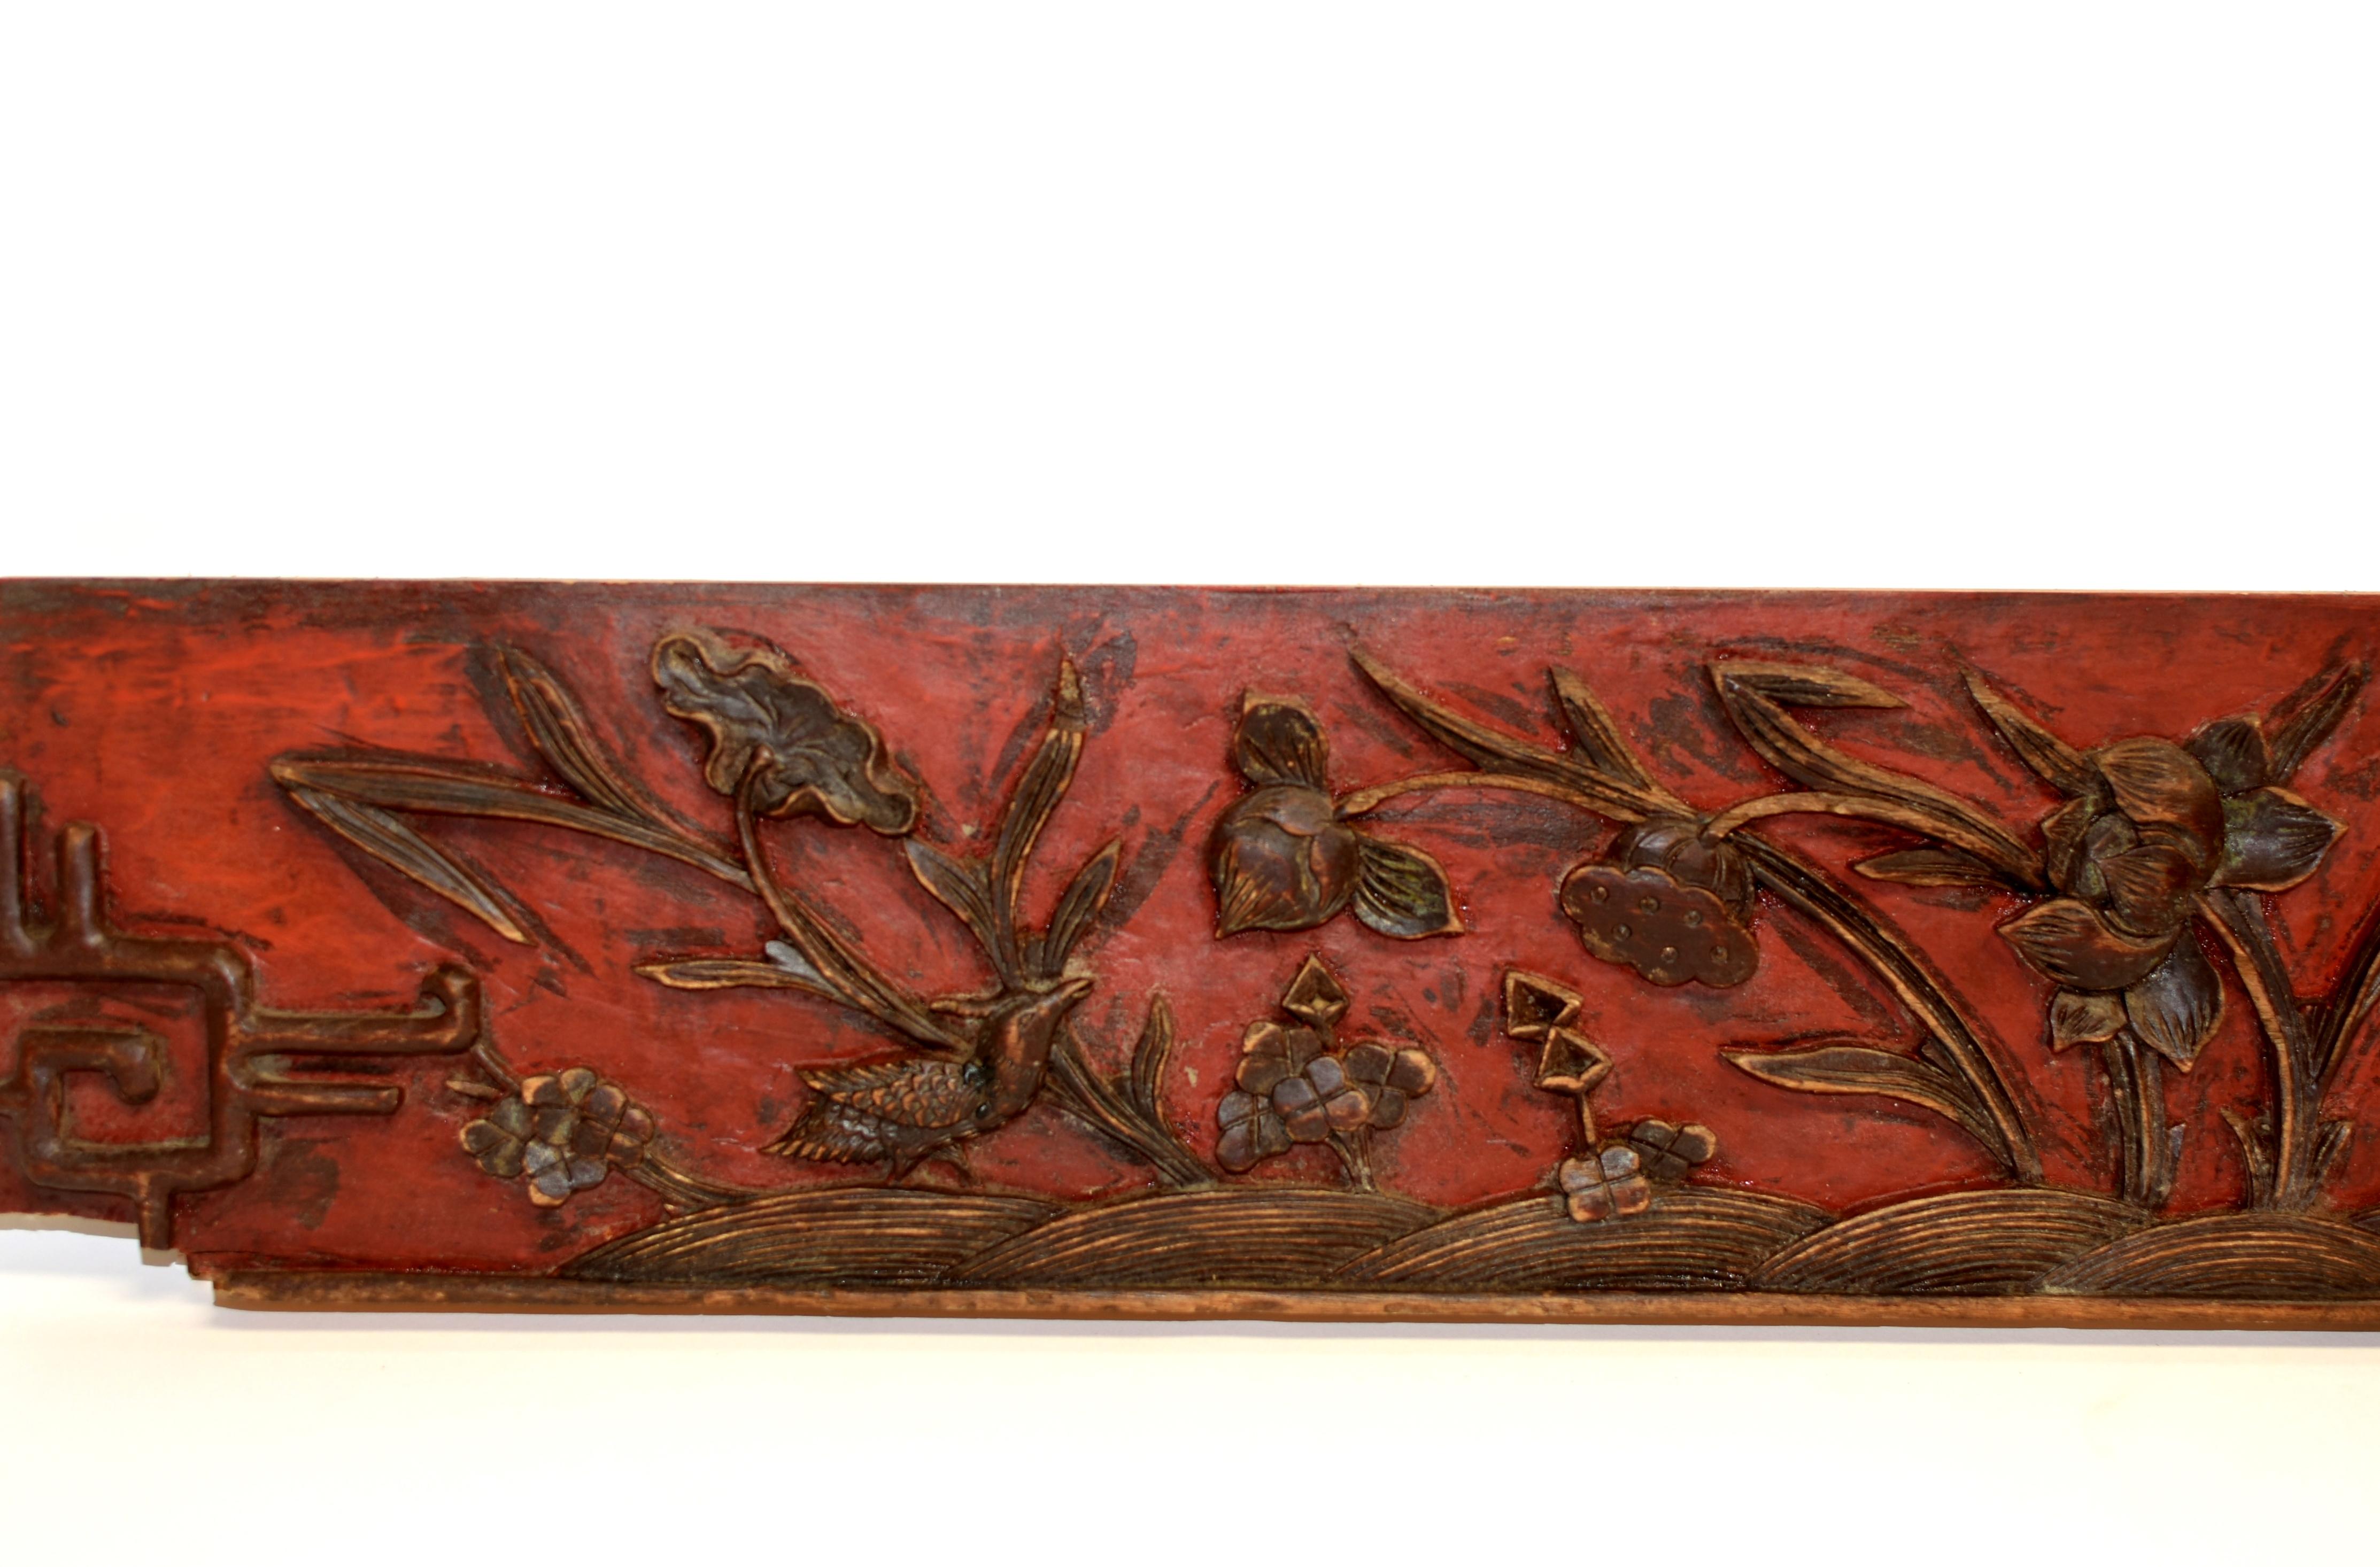 A solid wood panel with deep relief carvings of lotus in various stages of blooming. A pair of birds with one in motion of landing and the other on the ground echoing each other. On red lacquered background is a field of water irises with their